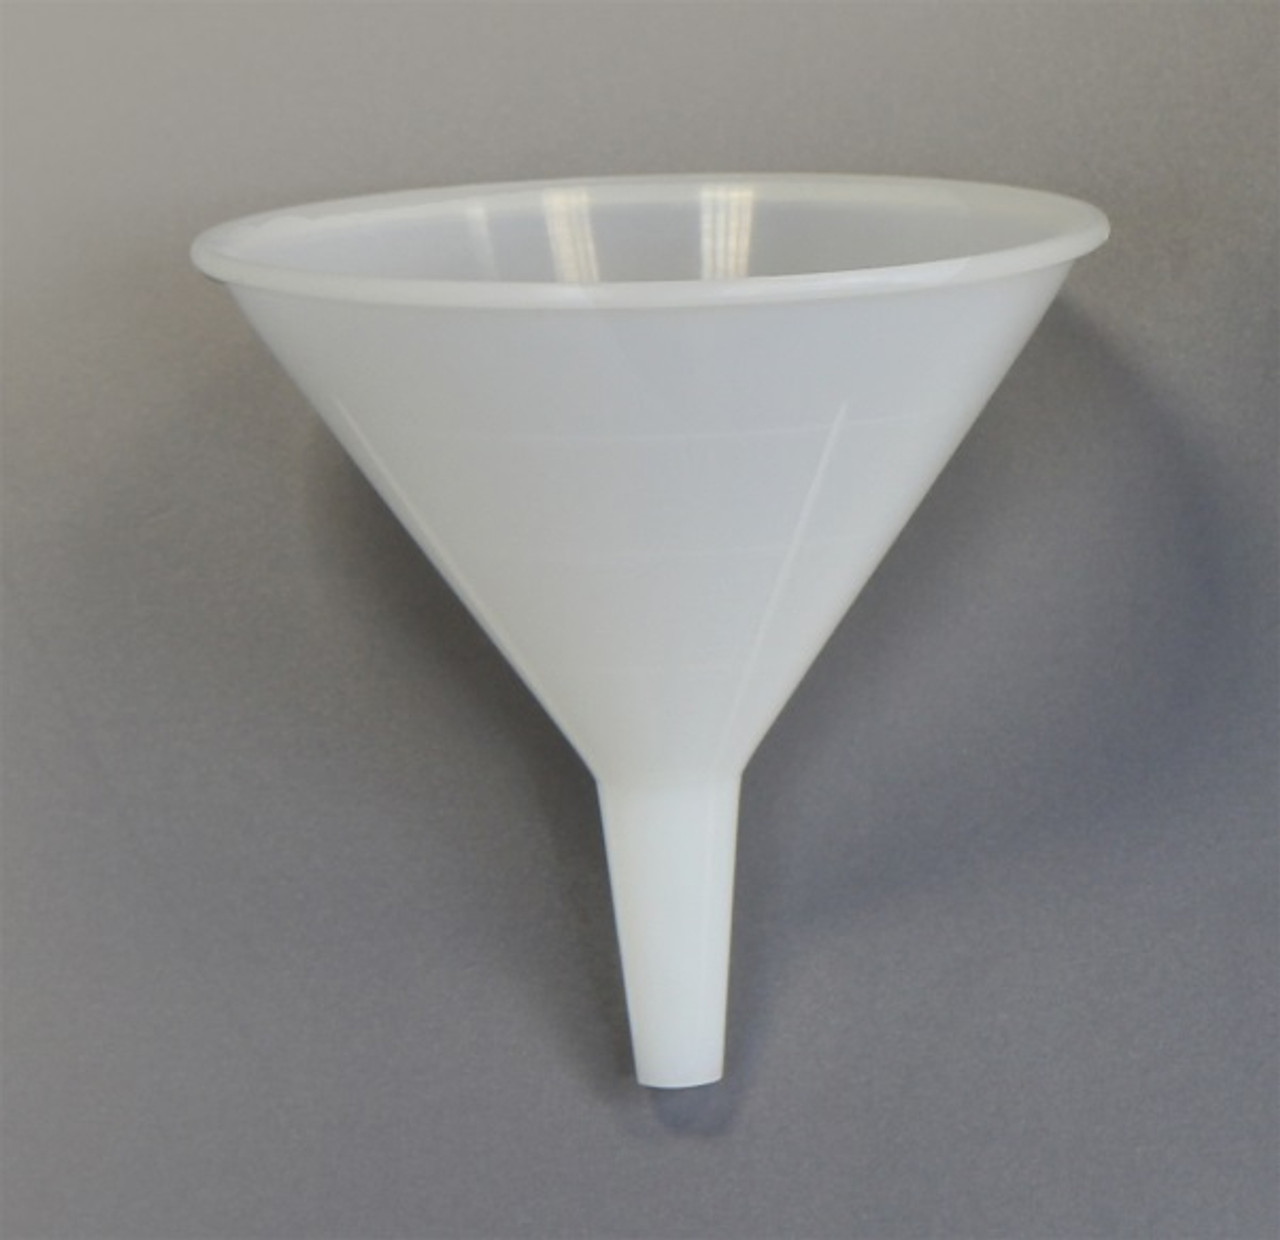 QTY (50) DISPOSABLE FUNNEL HDPE STERILE 100 MM TOP DIAMETER QTY